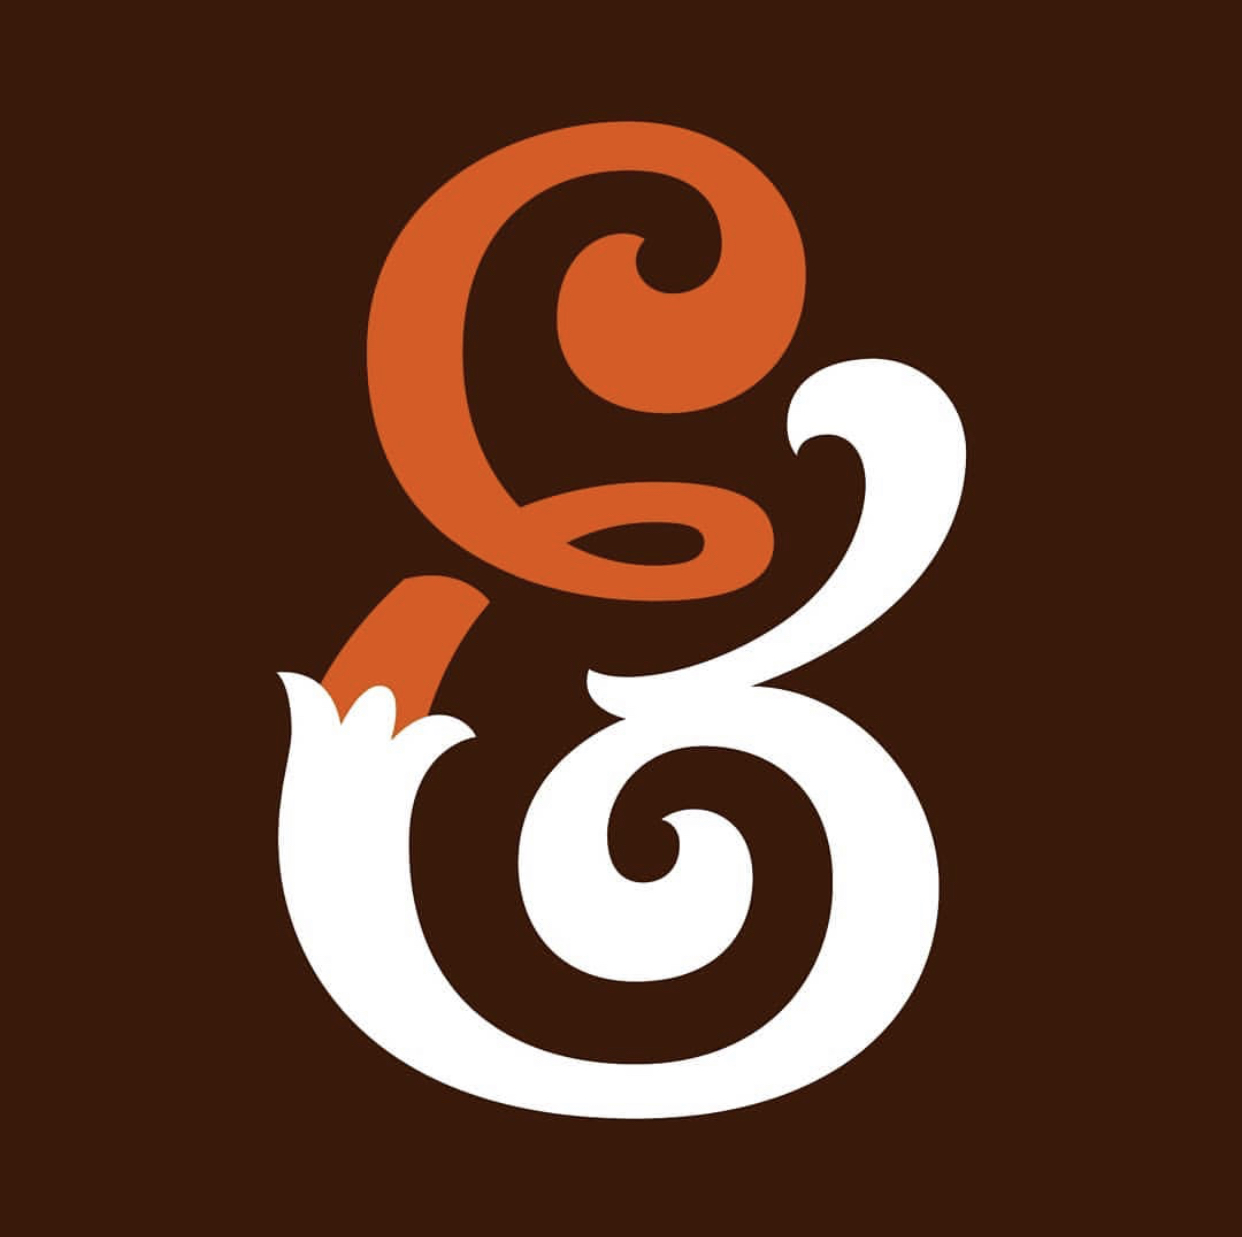 Orange and White Ampersand on Brown Background